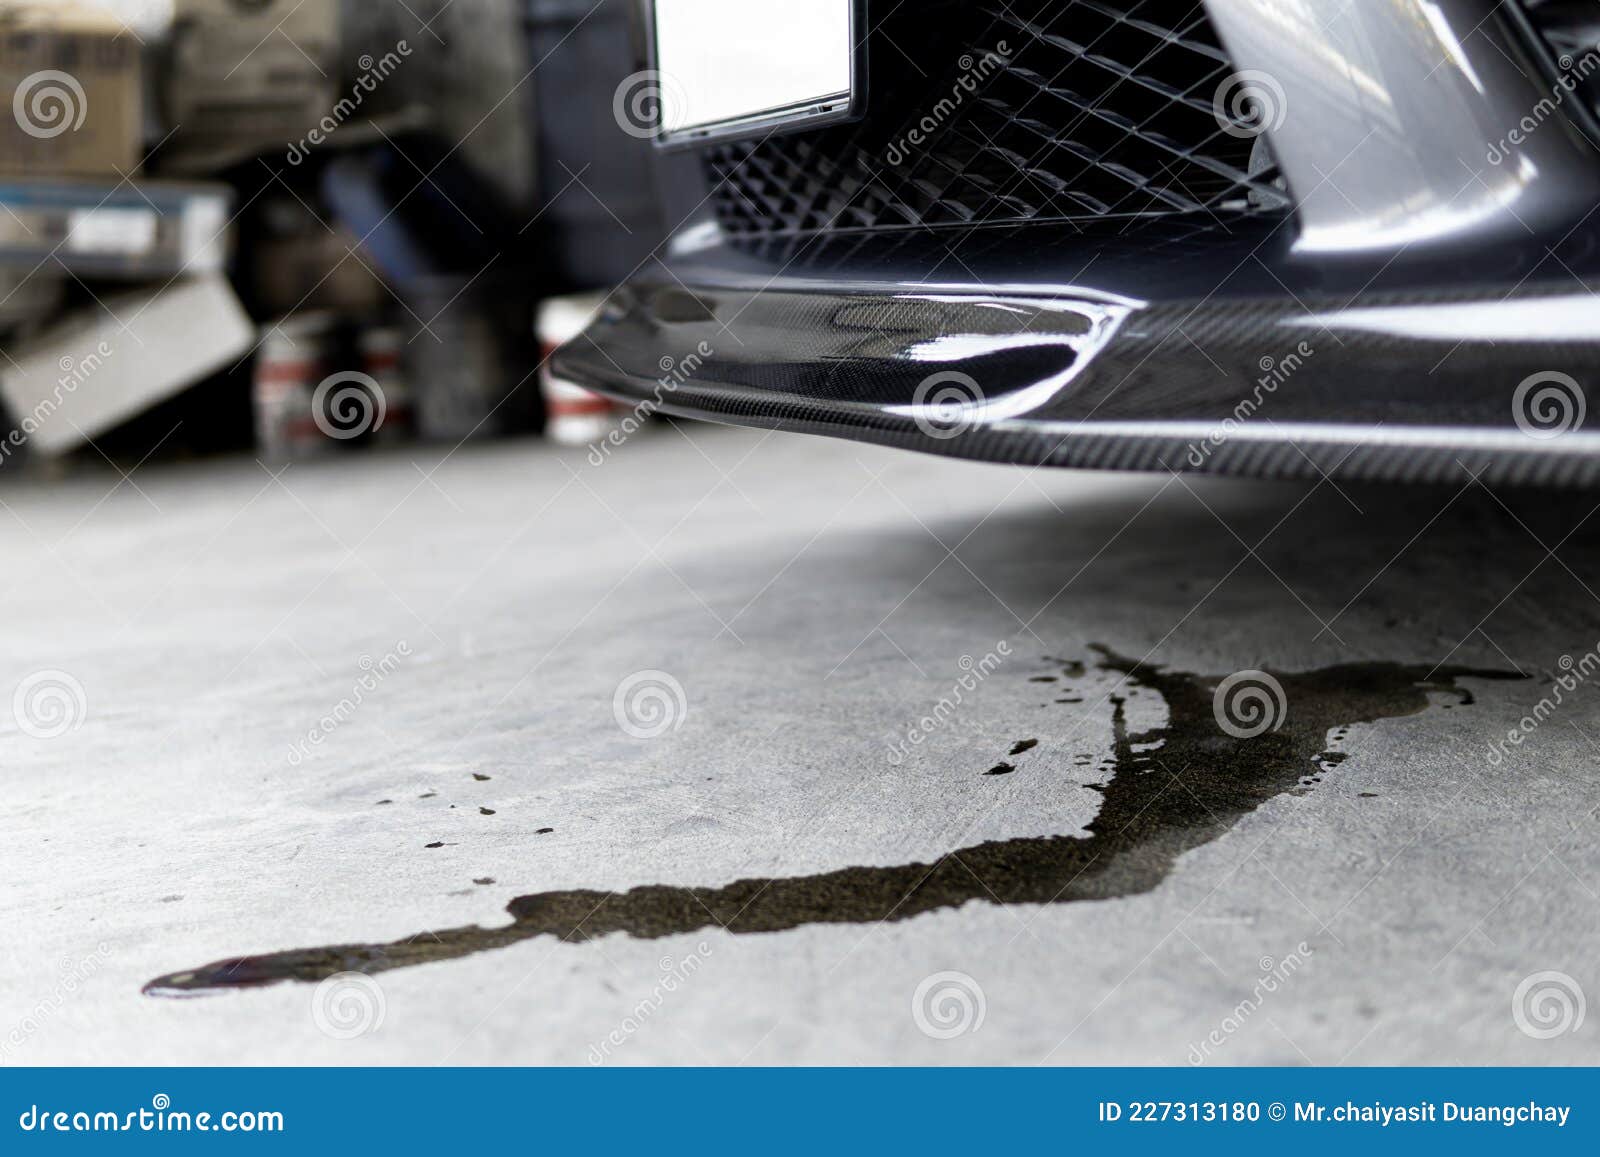 Engine Oil Stains A Car Leak Under The Car When The Car Is Park On The